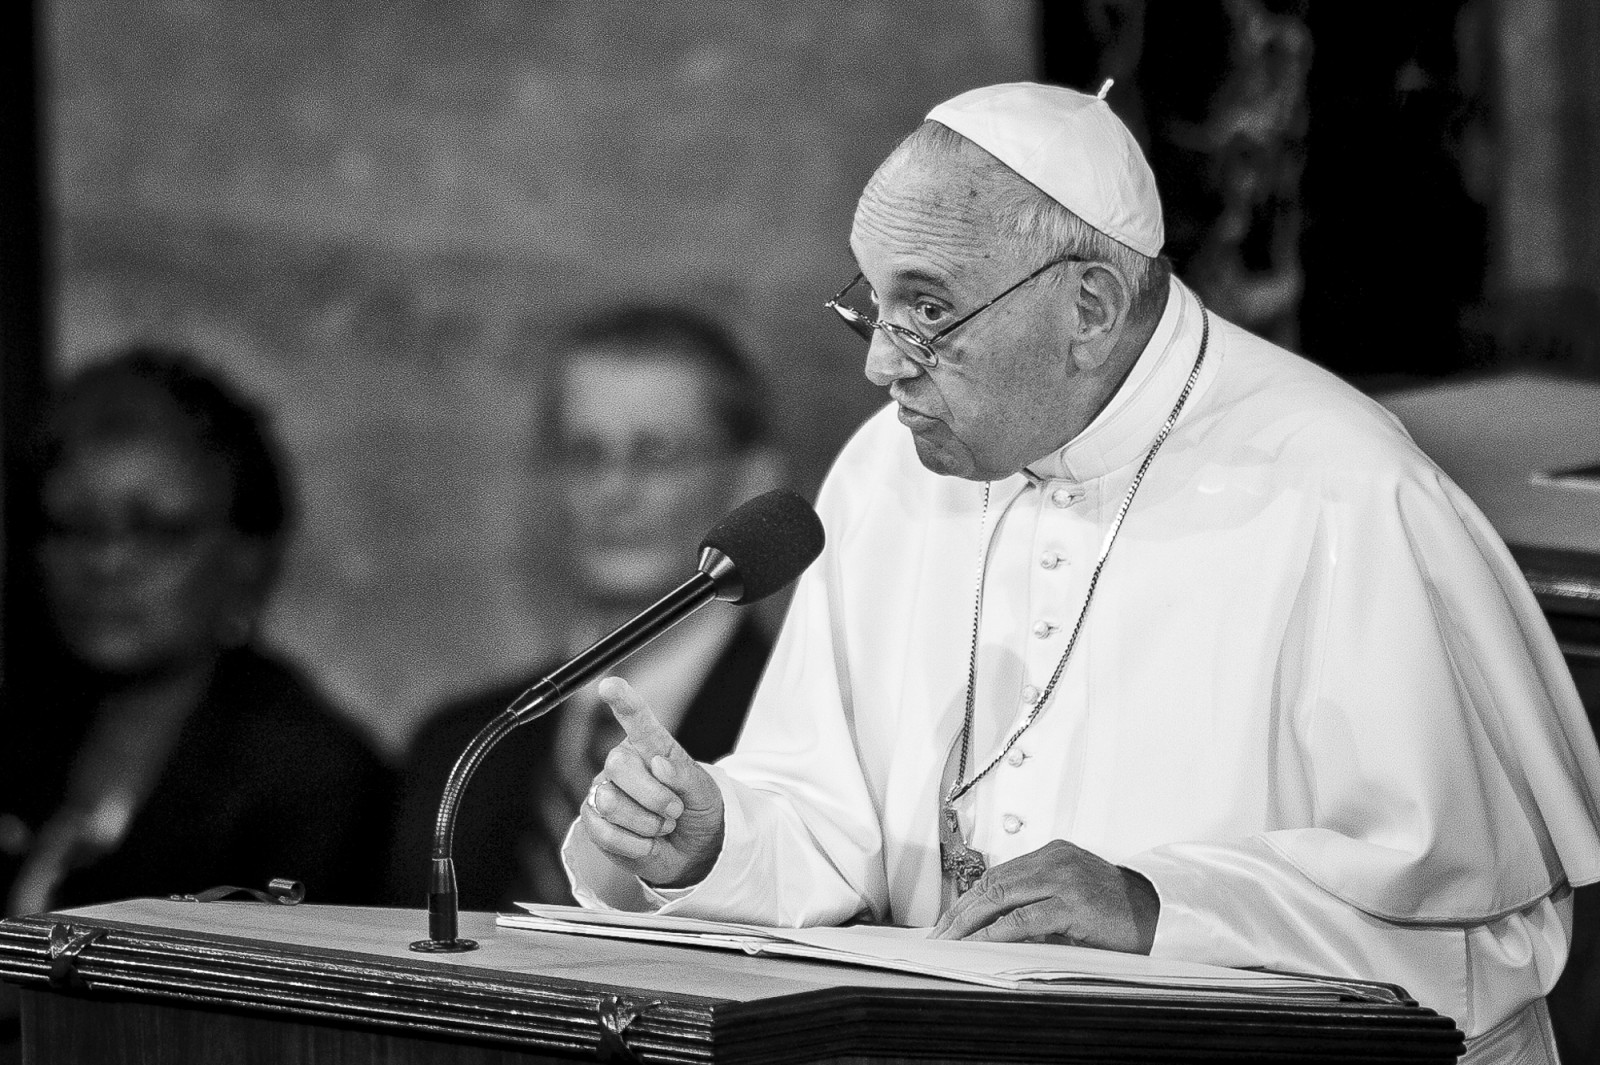 Pope Francis speaks to a joint meeting of Congress at the U.S. Capitol in Washington, District of Columbia, U.S., on Thursday, Sept. 24, 2015. Credit: Pete Marovich/Bloomberg